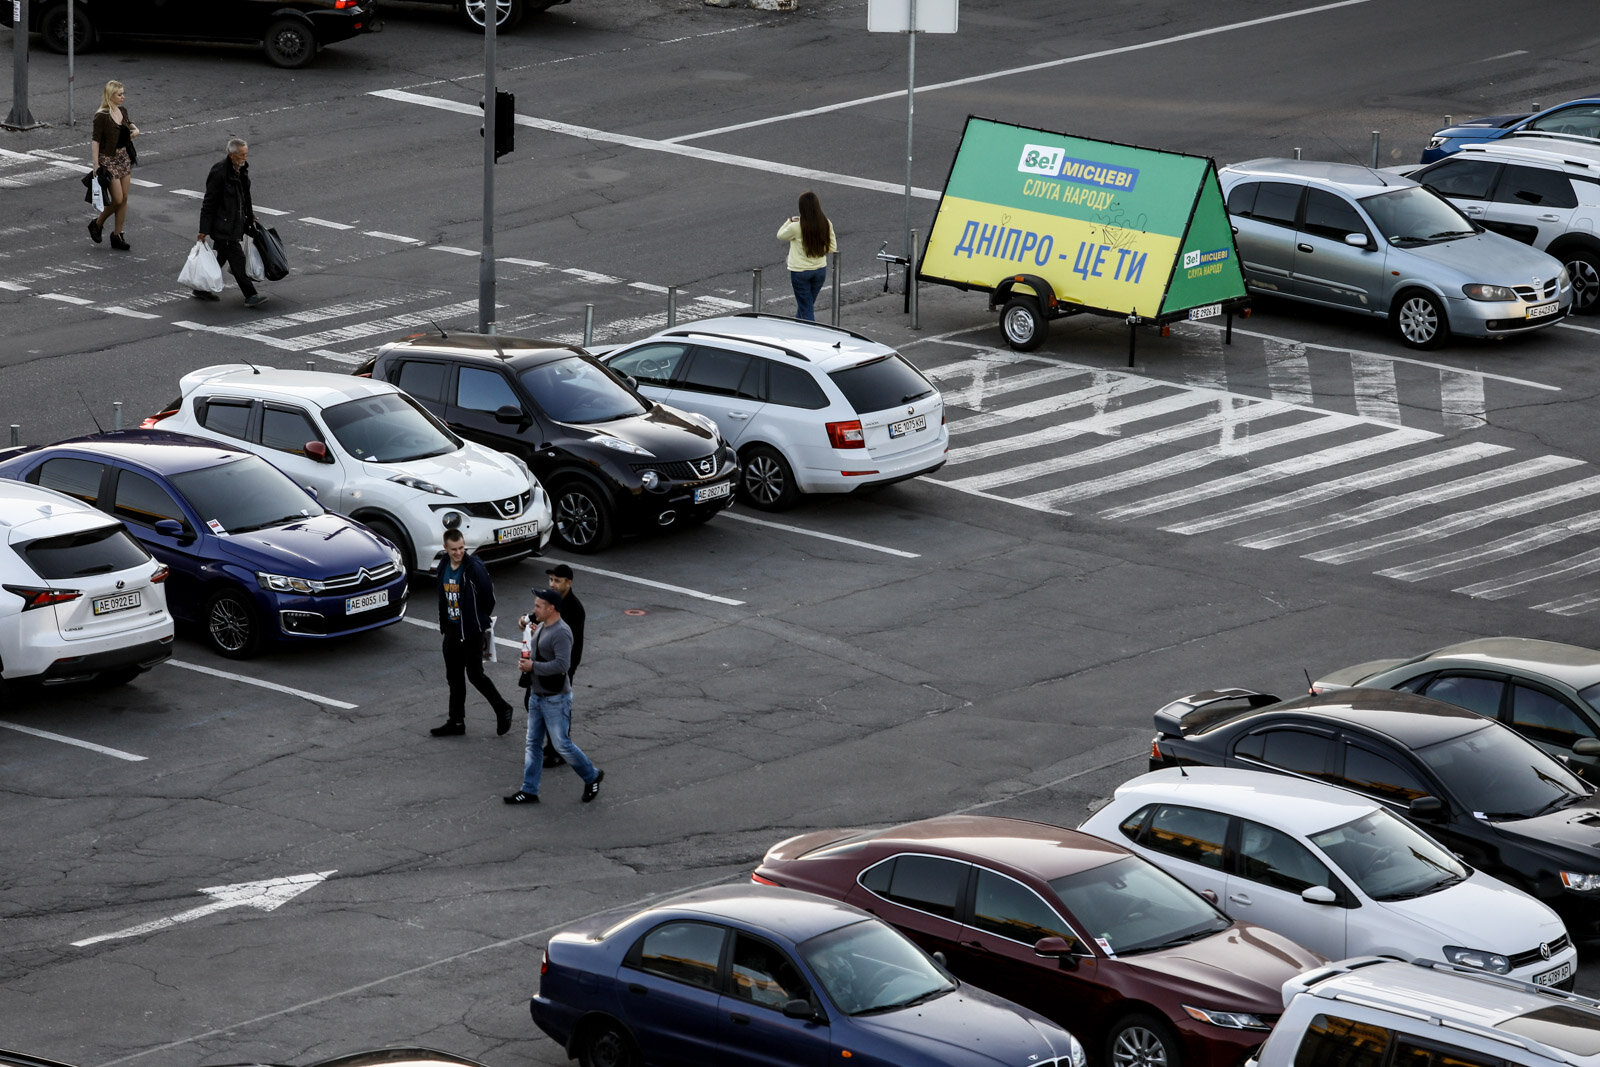 People walk through a parking lot near the Servant of the People party campaign banner in Dnipro, on Oct. 6, 2020. Street ads of the Servant of the People party are unofficially banned in the city.